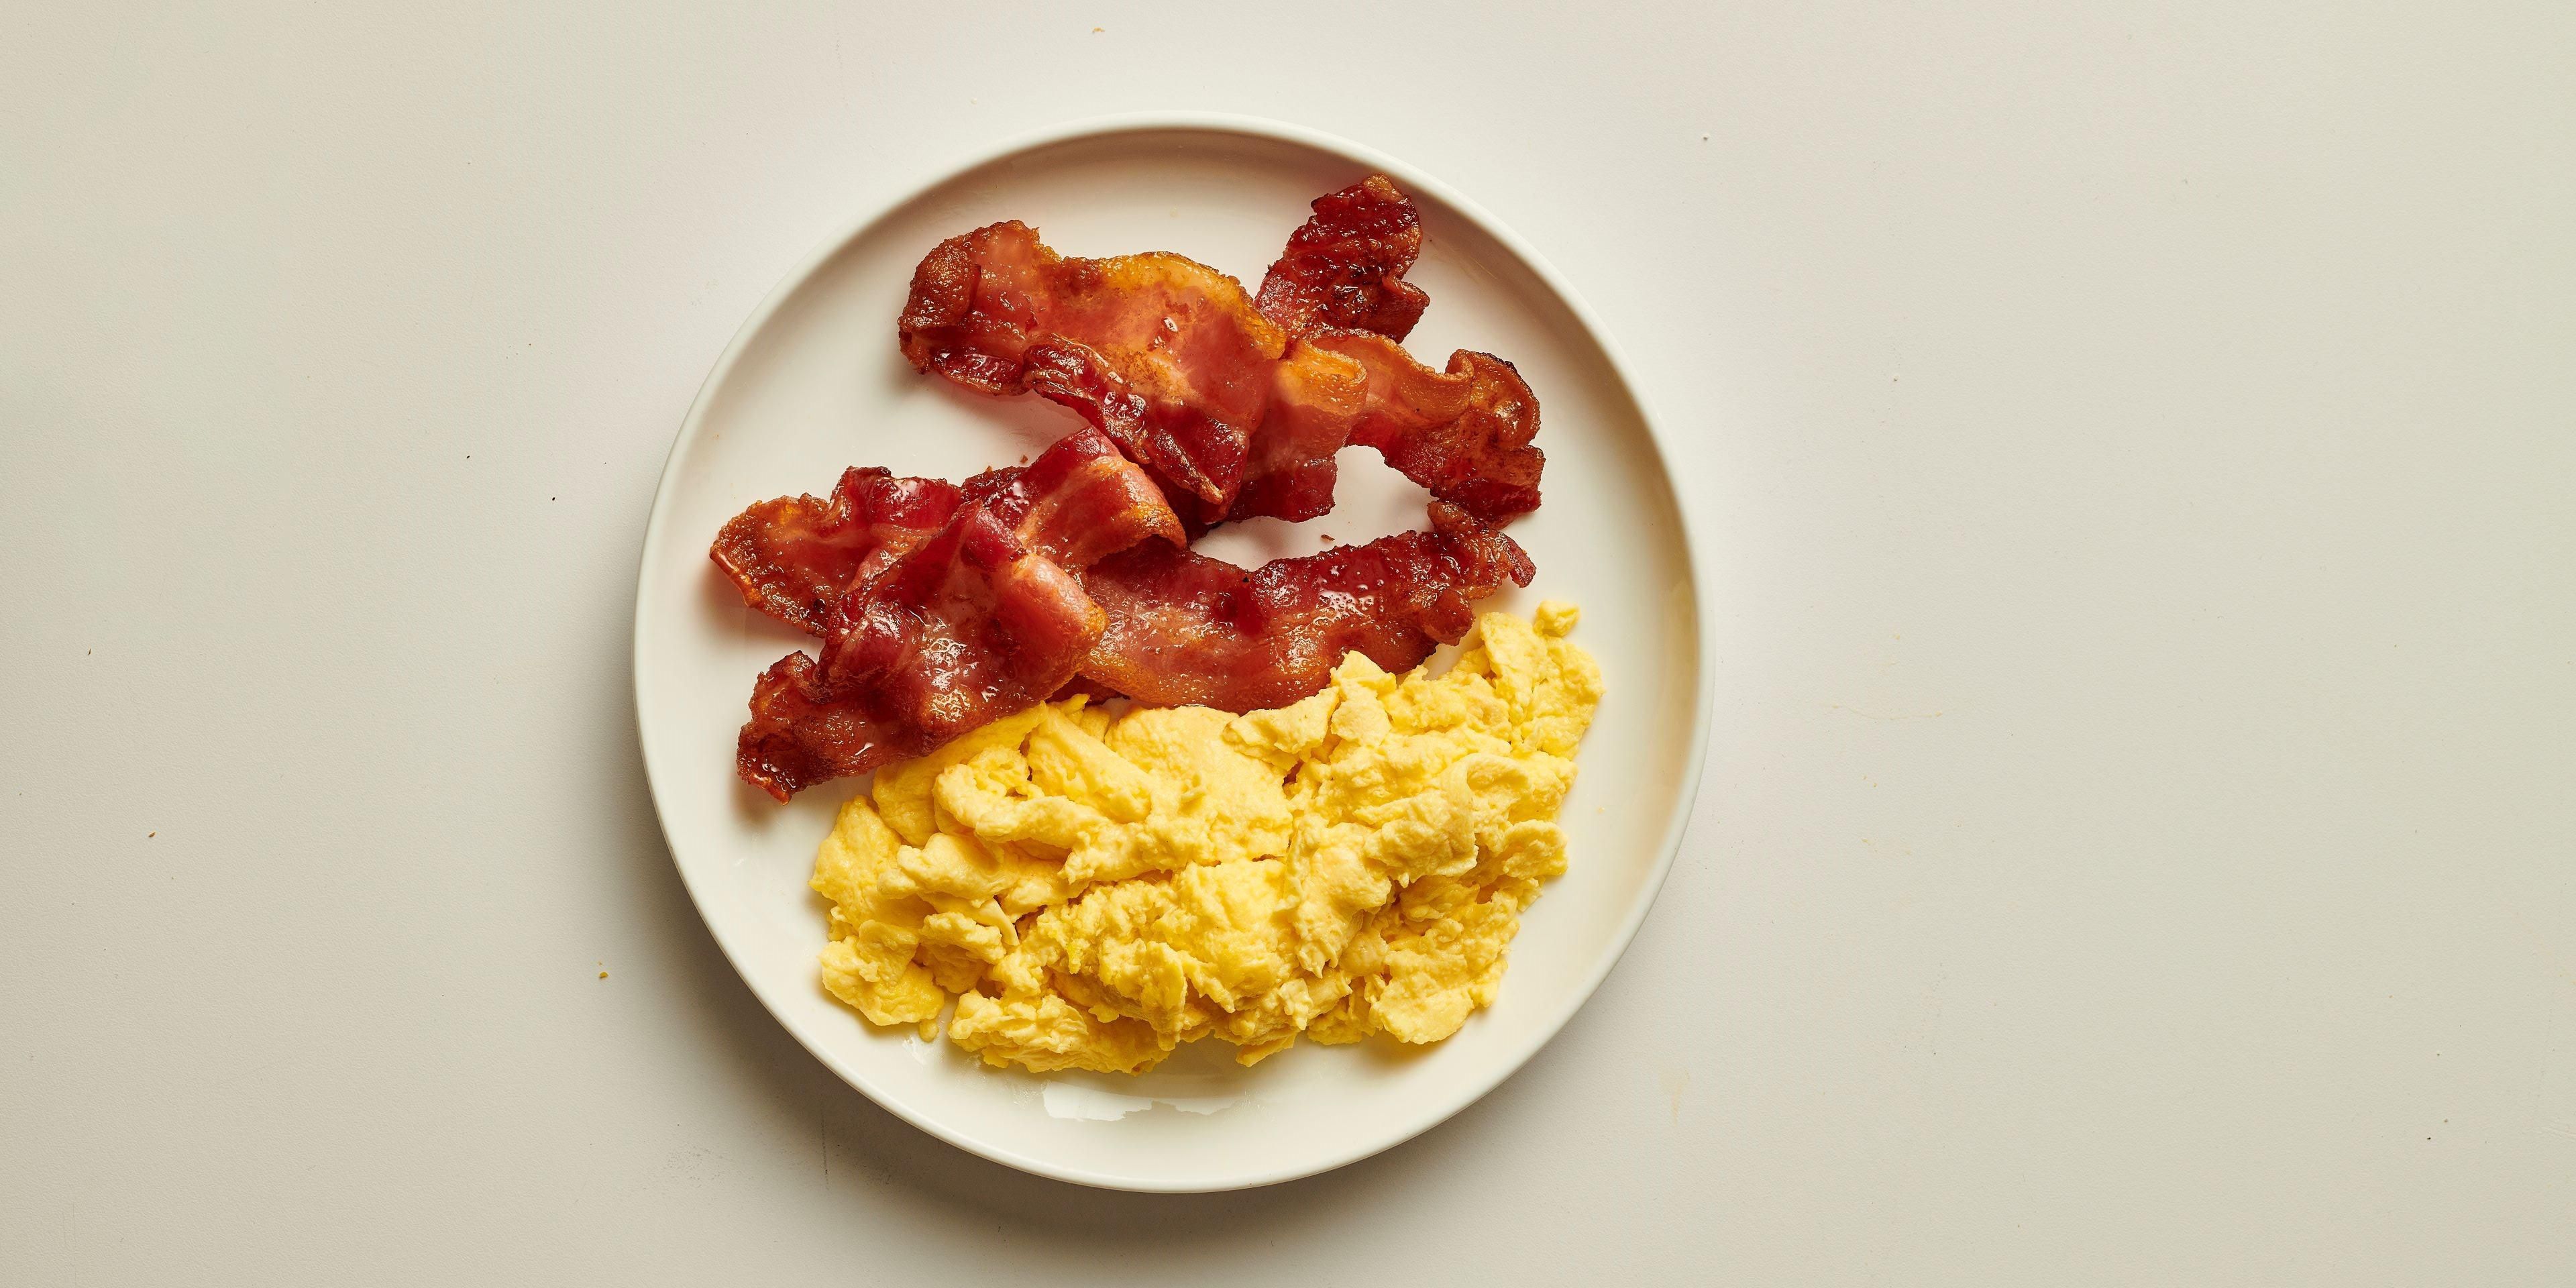 Cage-free scrambled eggs and thick-cut bacon